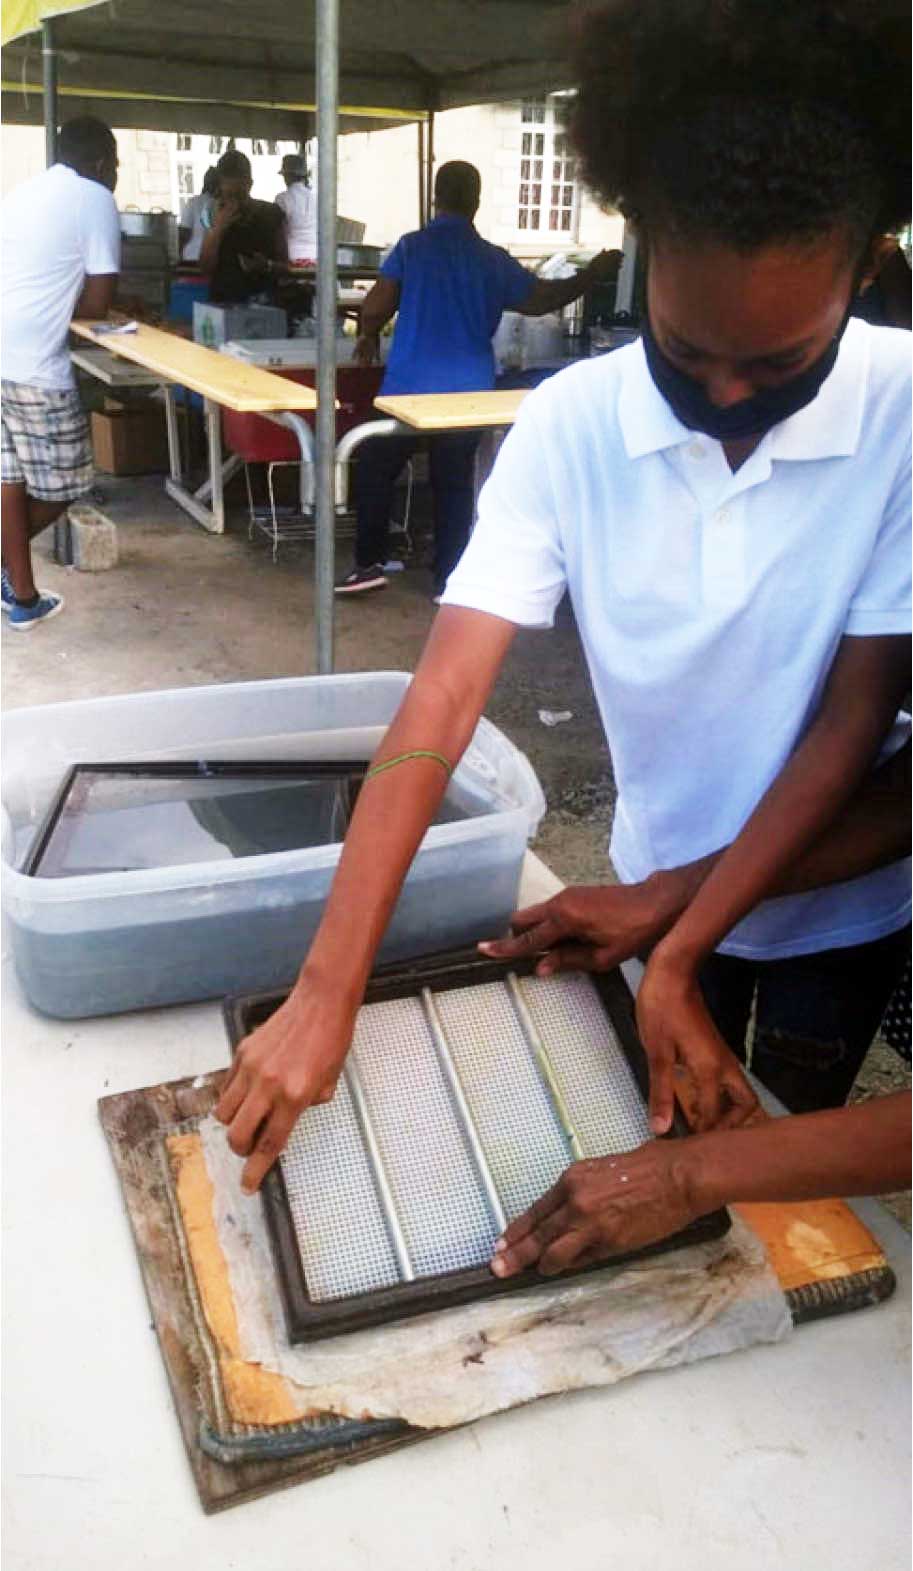 Paper making on show at the Banana Festival.